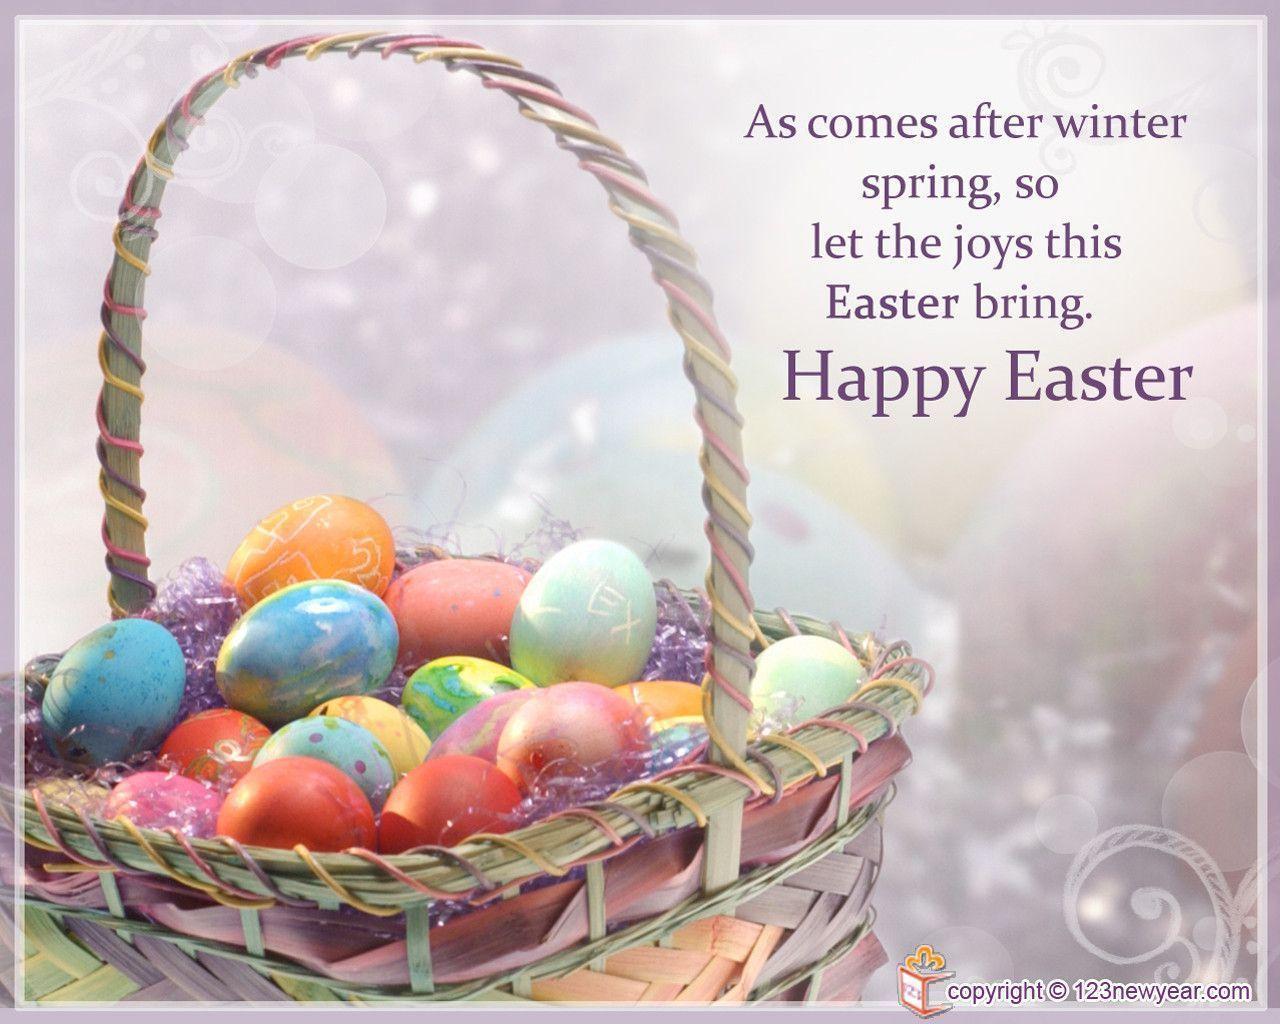 Happy Easter 2014 Sunday, Easter Monday, Easter Weekend 2014